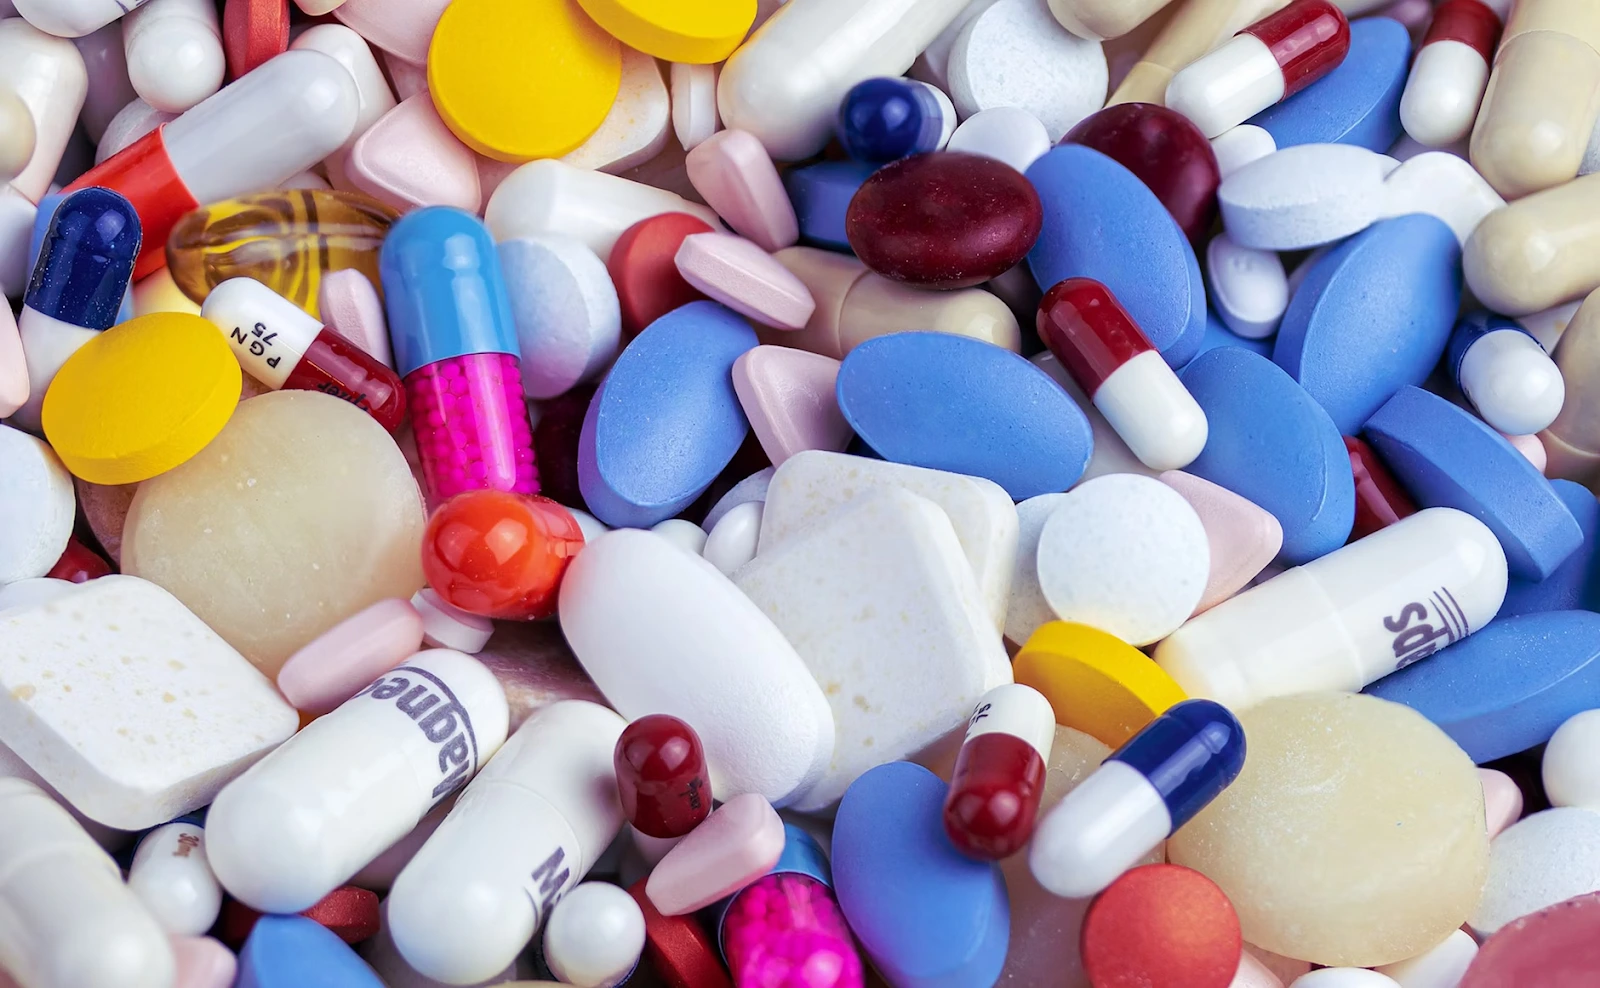 A colorful mix of different tablets and capsules